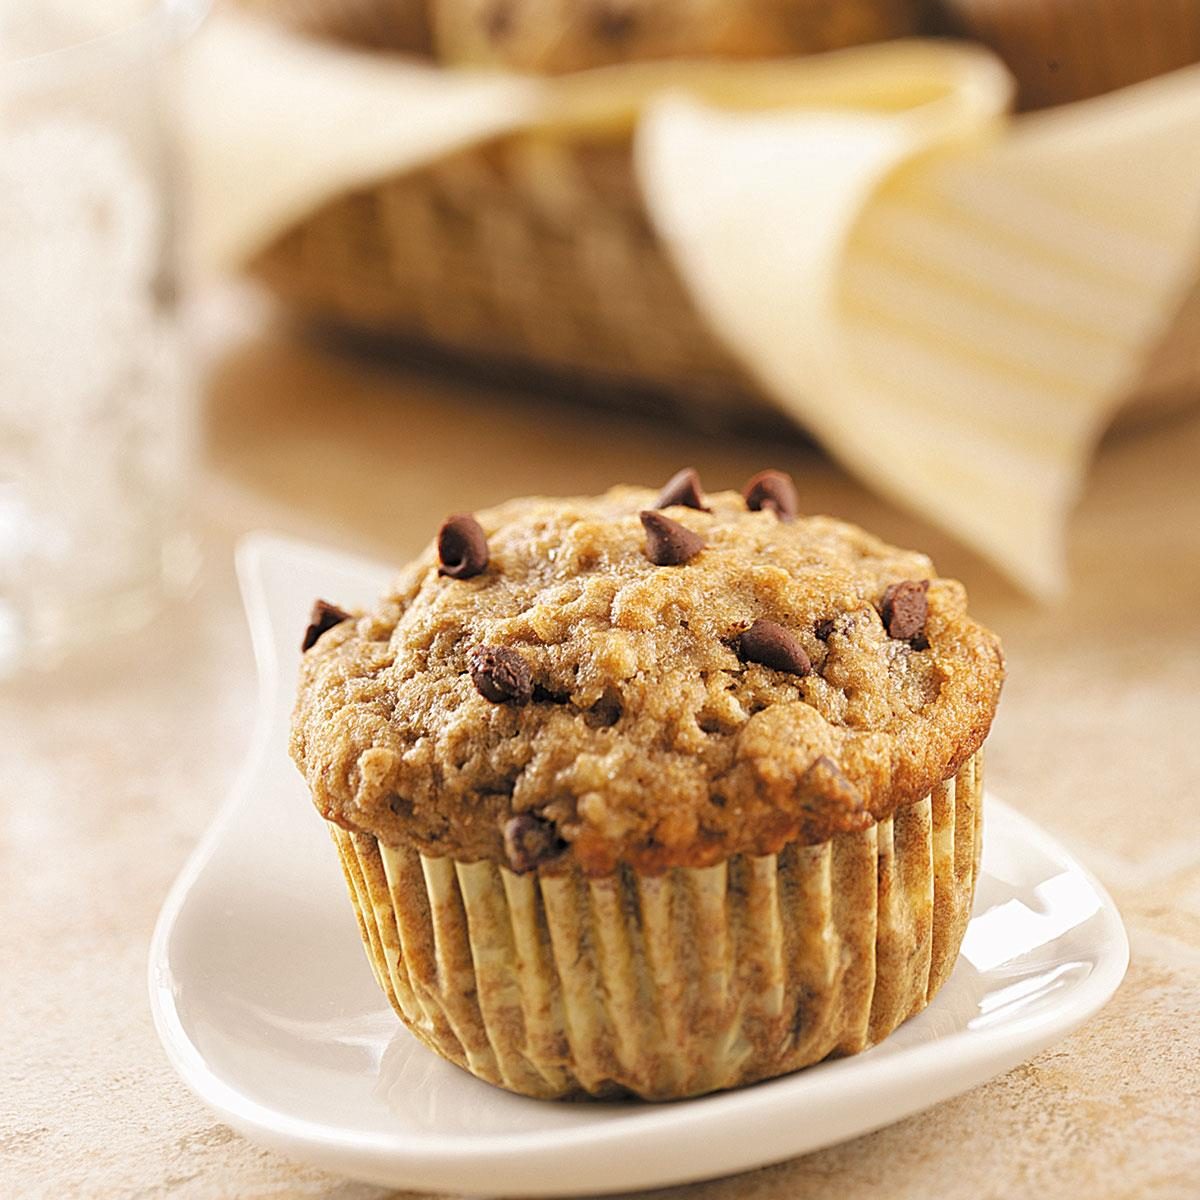 https://www.tasteofhome.com/wp-content/uploads/2018/01/Banana-Muffins-with-Miniature-Chocolate-Chips_exps35121_CFT1437884D17A_RMS-4.jpg